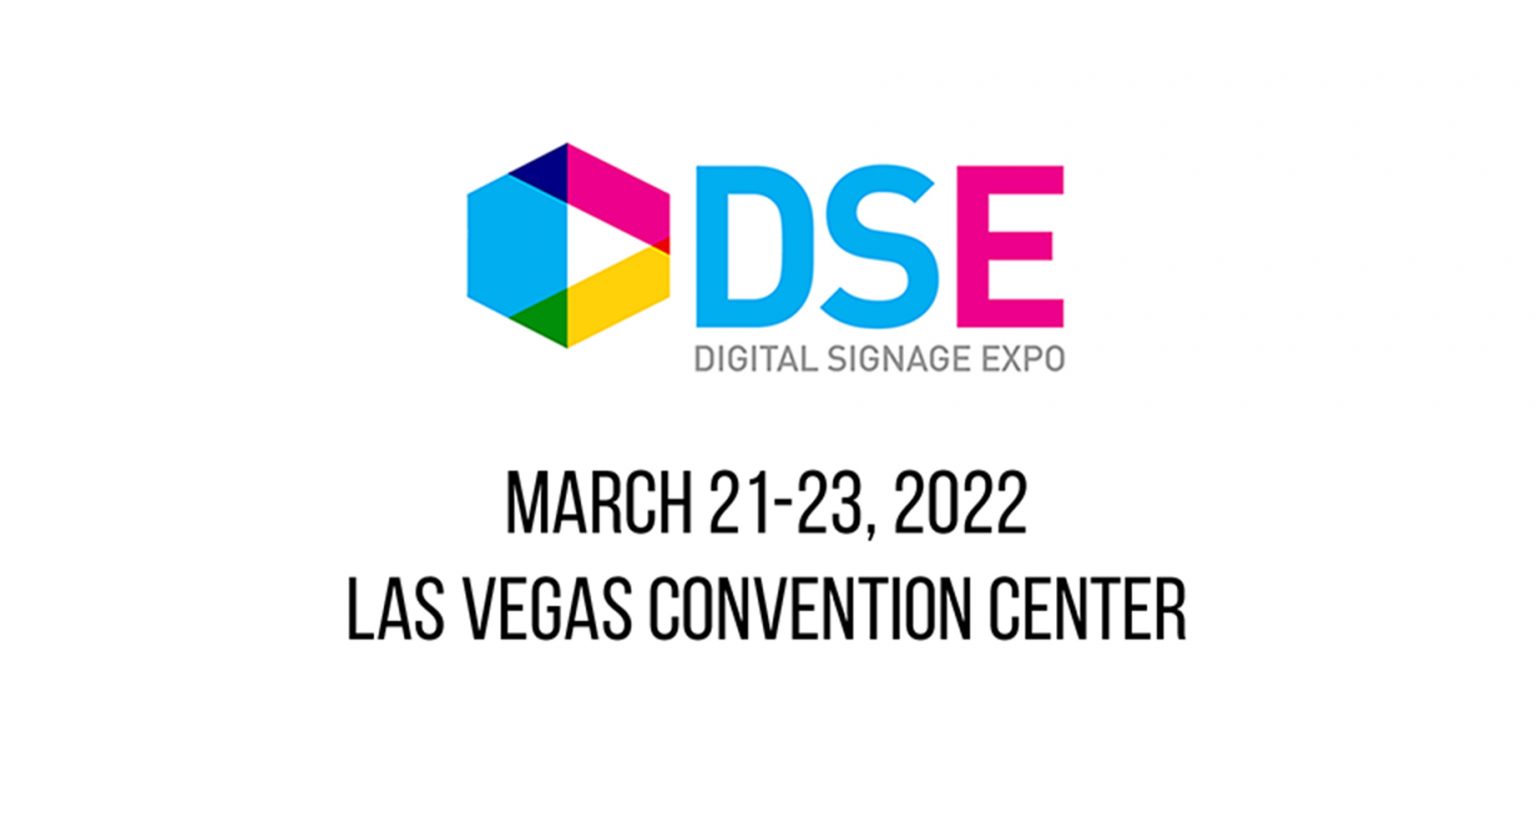 Digital Signage Expo 2022 Show Dates & Location Announced by Questex